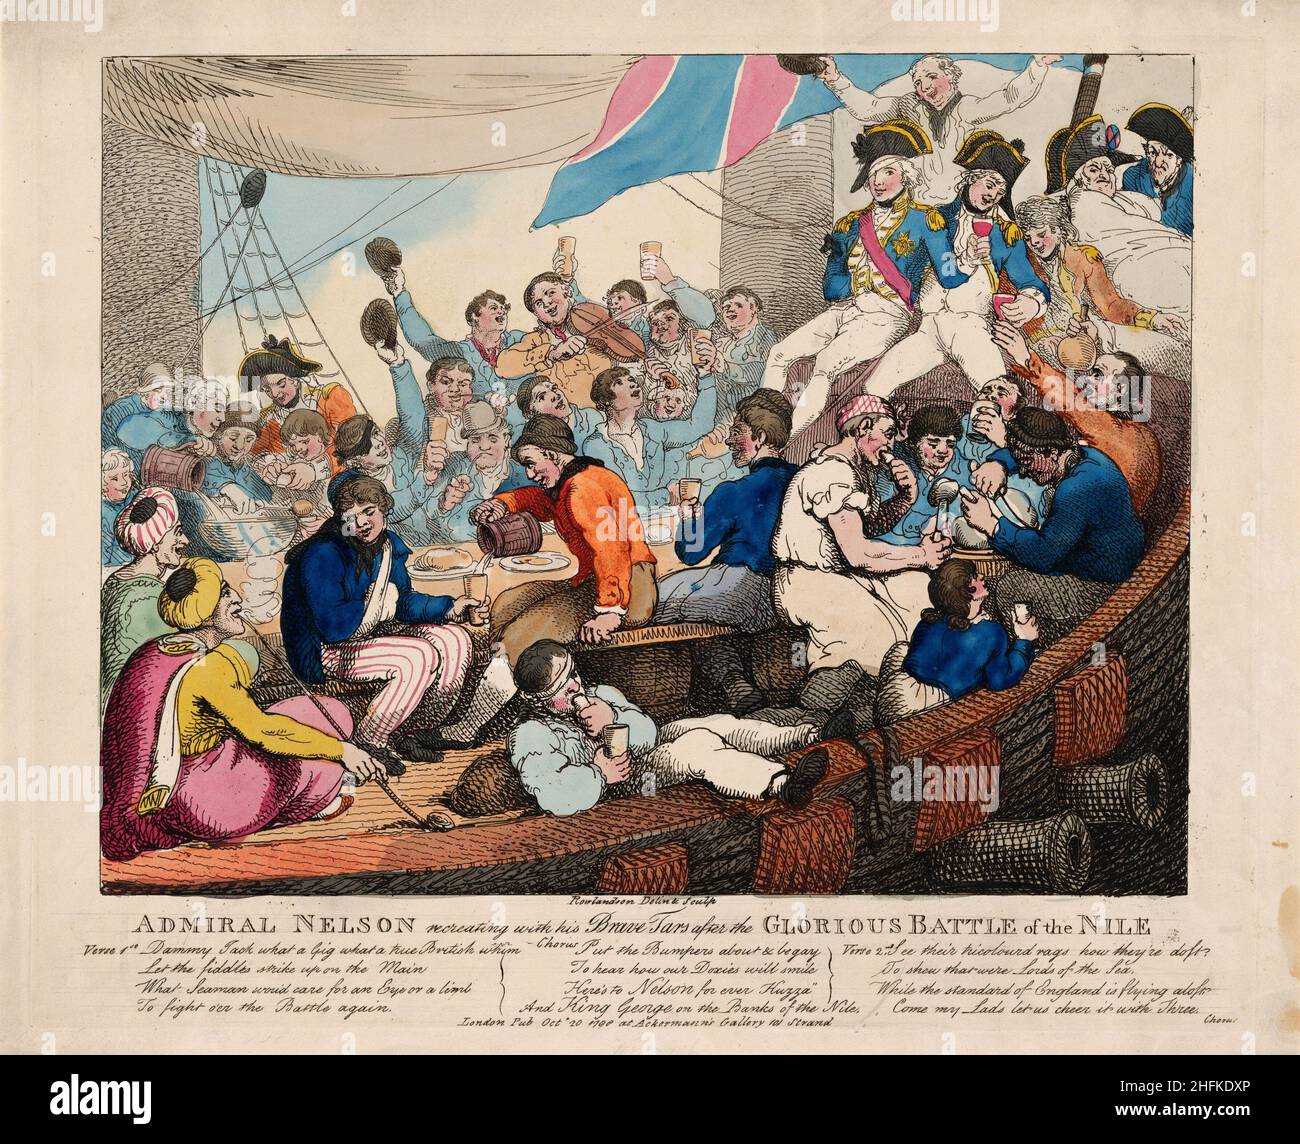 Admiral Nelson recreating with his brave Tars after the glorious Battle of the Nile. Artist: Thomas Rowlandson (1756-1827) an English artist and caricaturist of the Georgian Era. A social observer, he was a prolific artist and print maker.  Credit: Thomas Rowlandson/Alamy Stock Photo